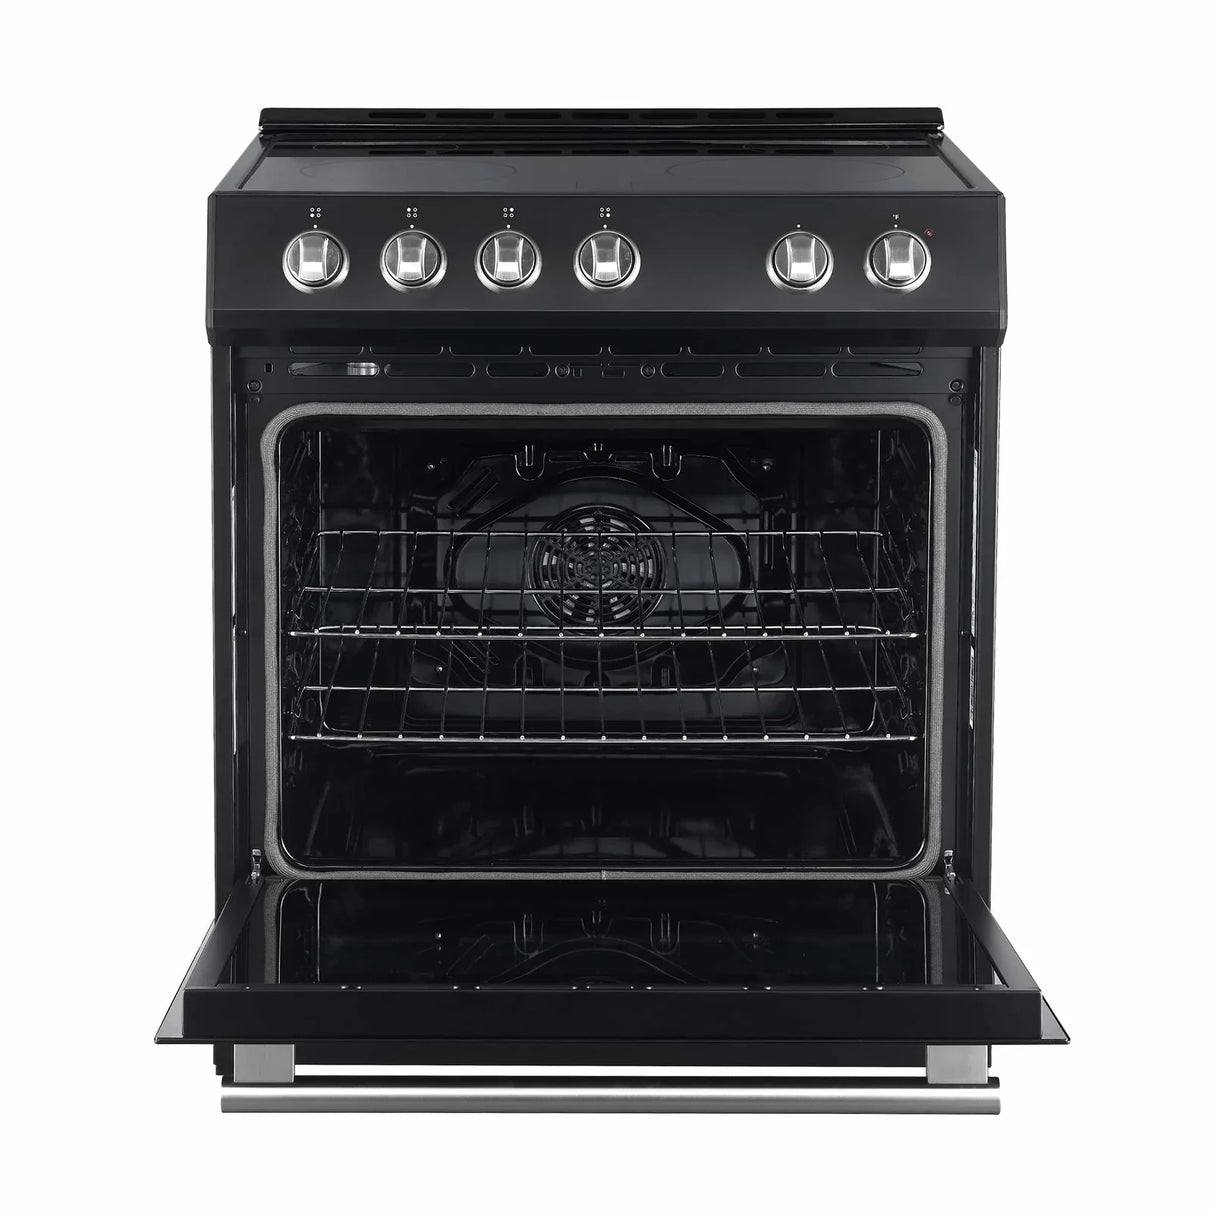 Forno Espresso 2-Piece Appliance Package - 30-Inch Electric Range with 5.0 Cu.Ft. Electric Oven and Under Cabinet Range Hood in Black with Stainless Steel Handle